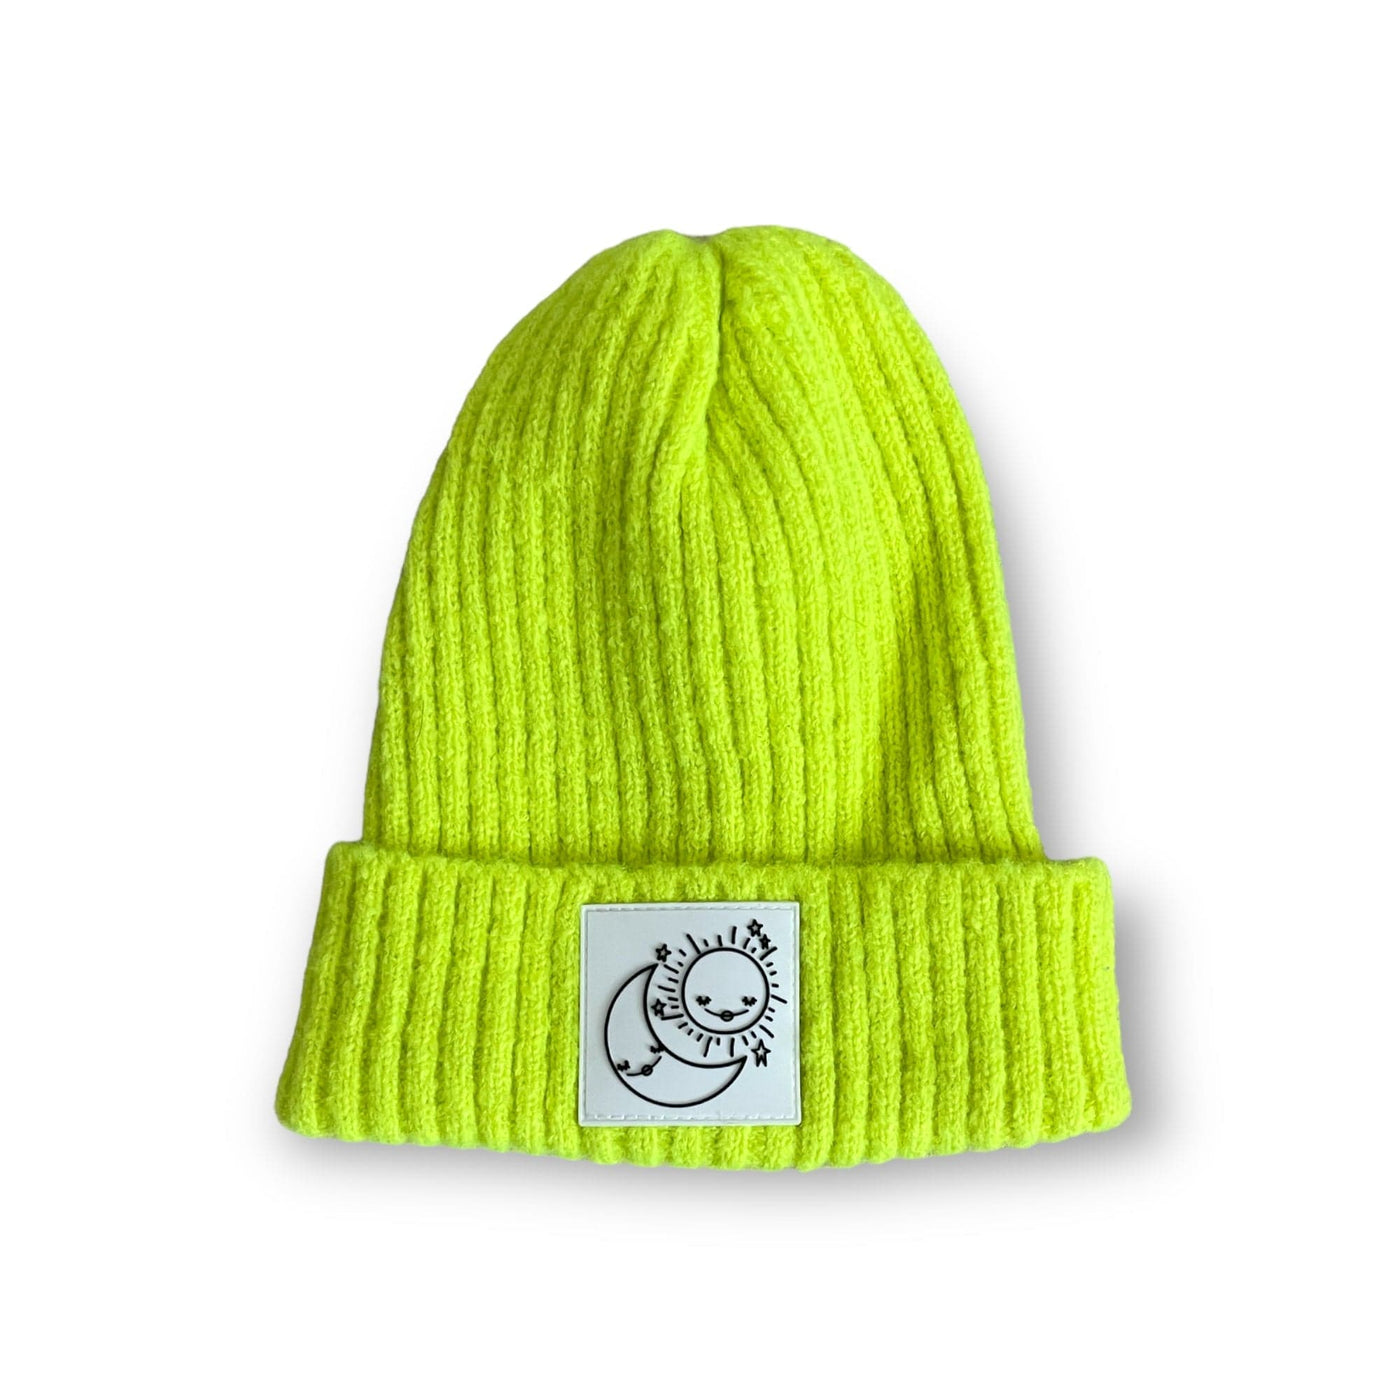 Best Day Ever Kids Baby & Toddler Hats Best Beanie Ever - Electric Yellow buy online boutique kids clothing